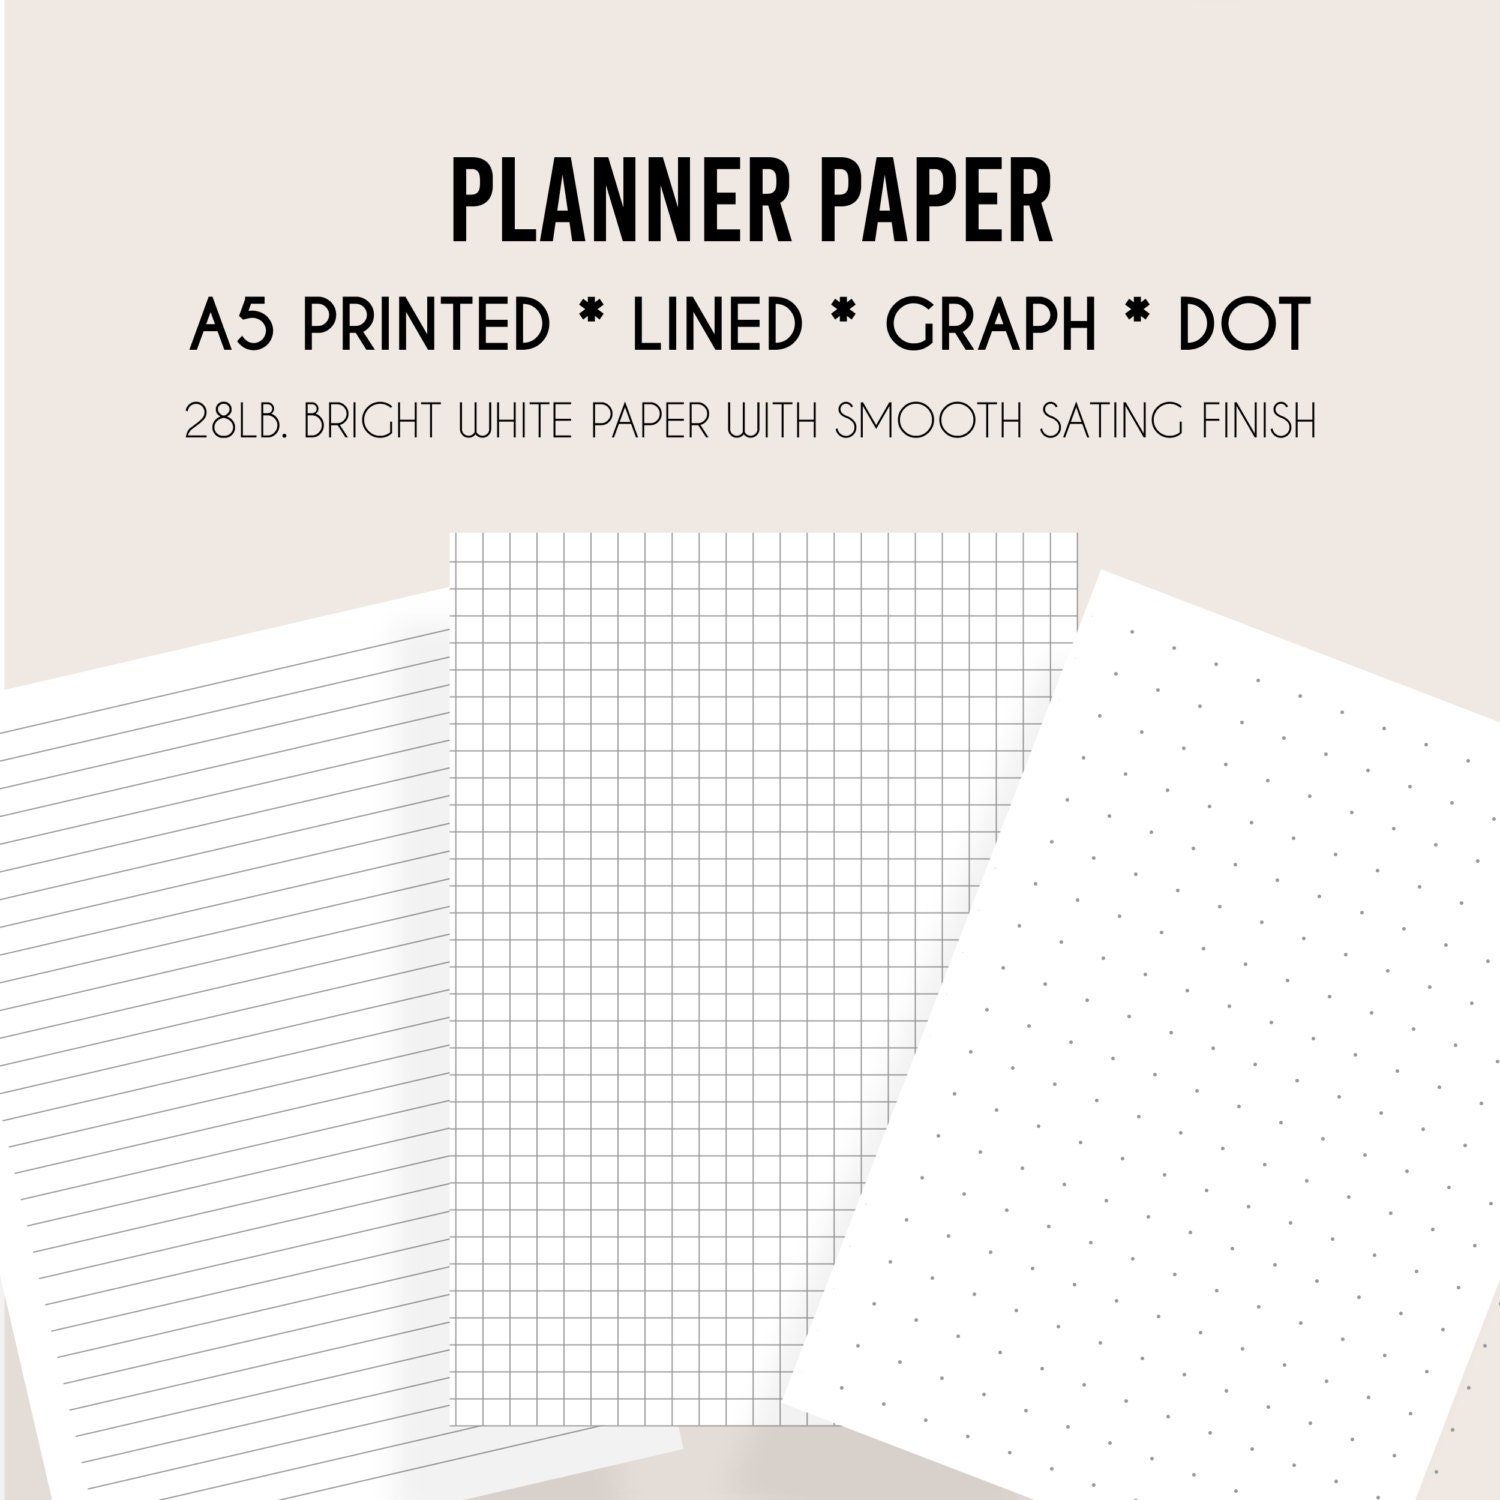 PRINTED A5 Lined Paper A5 Graph Paper A5 Dot Paper by NikkiKathryn